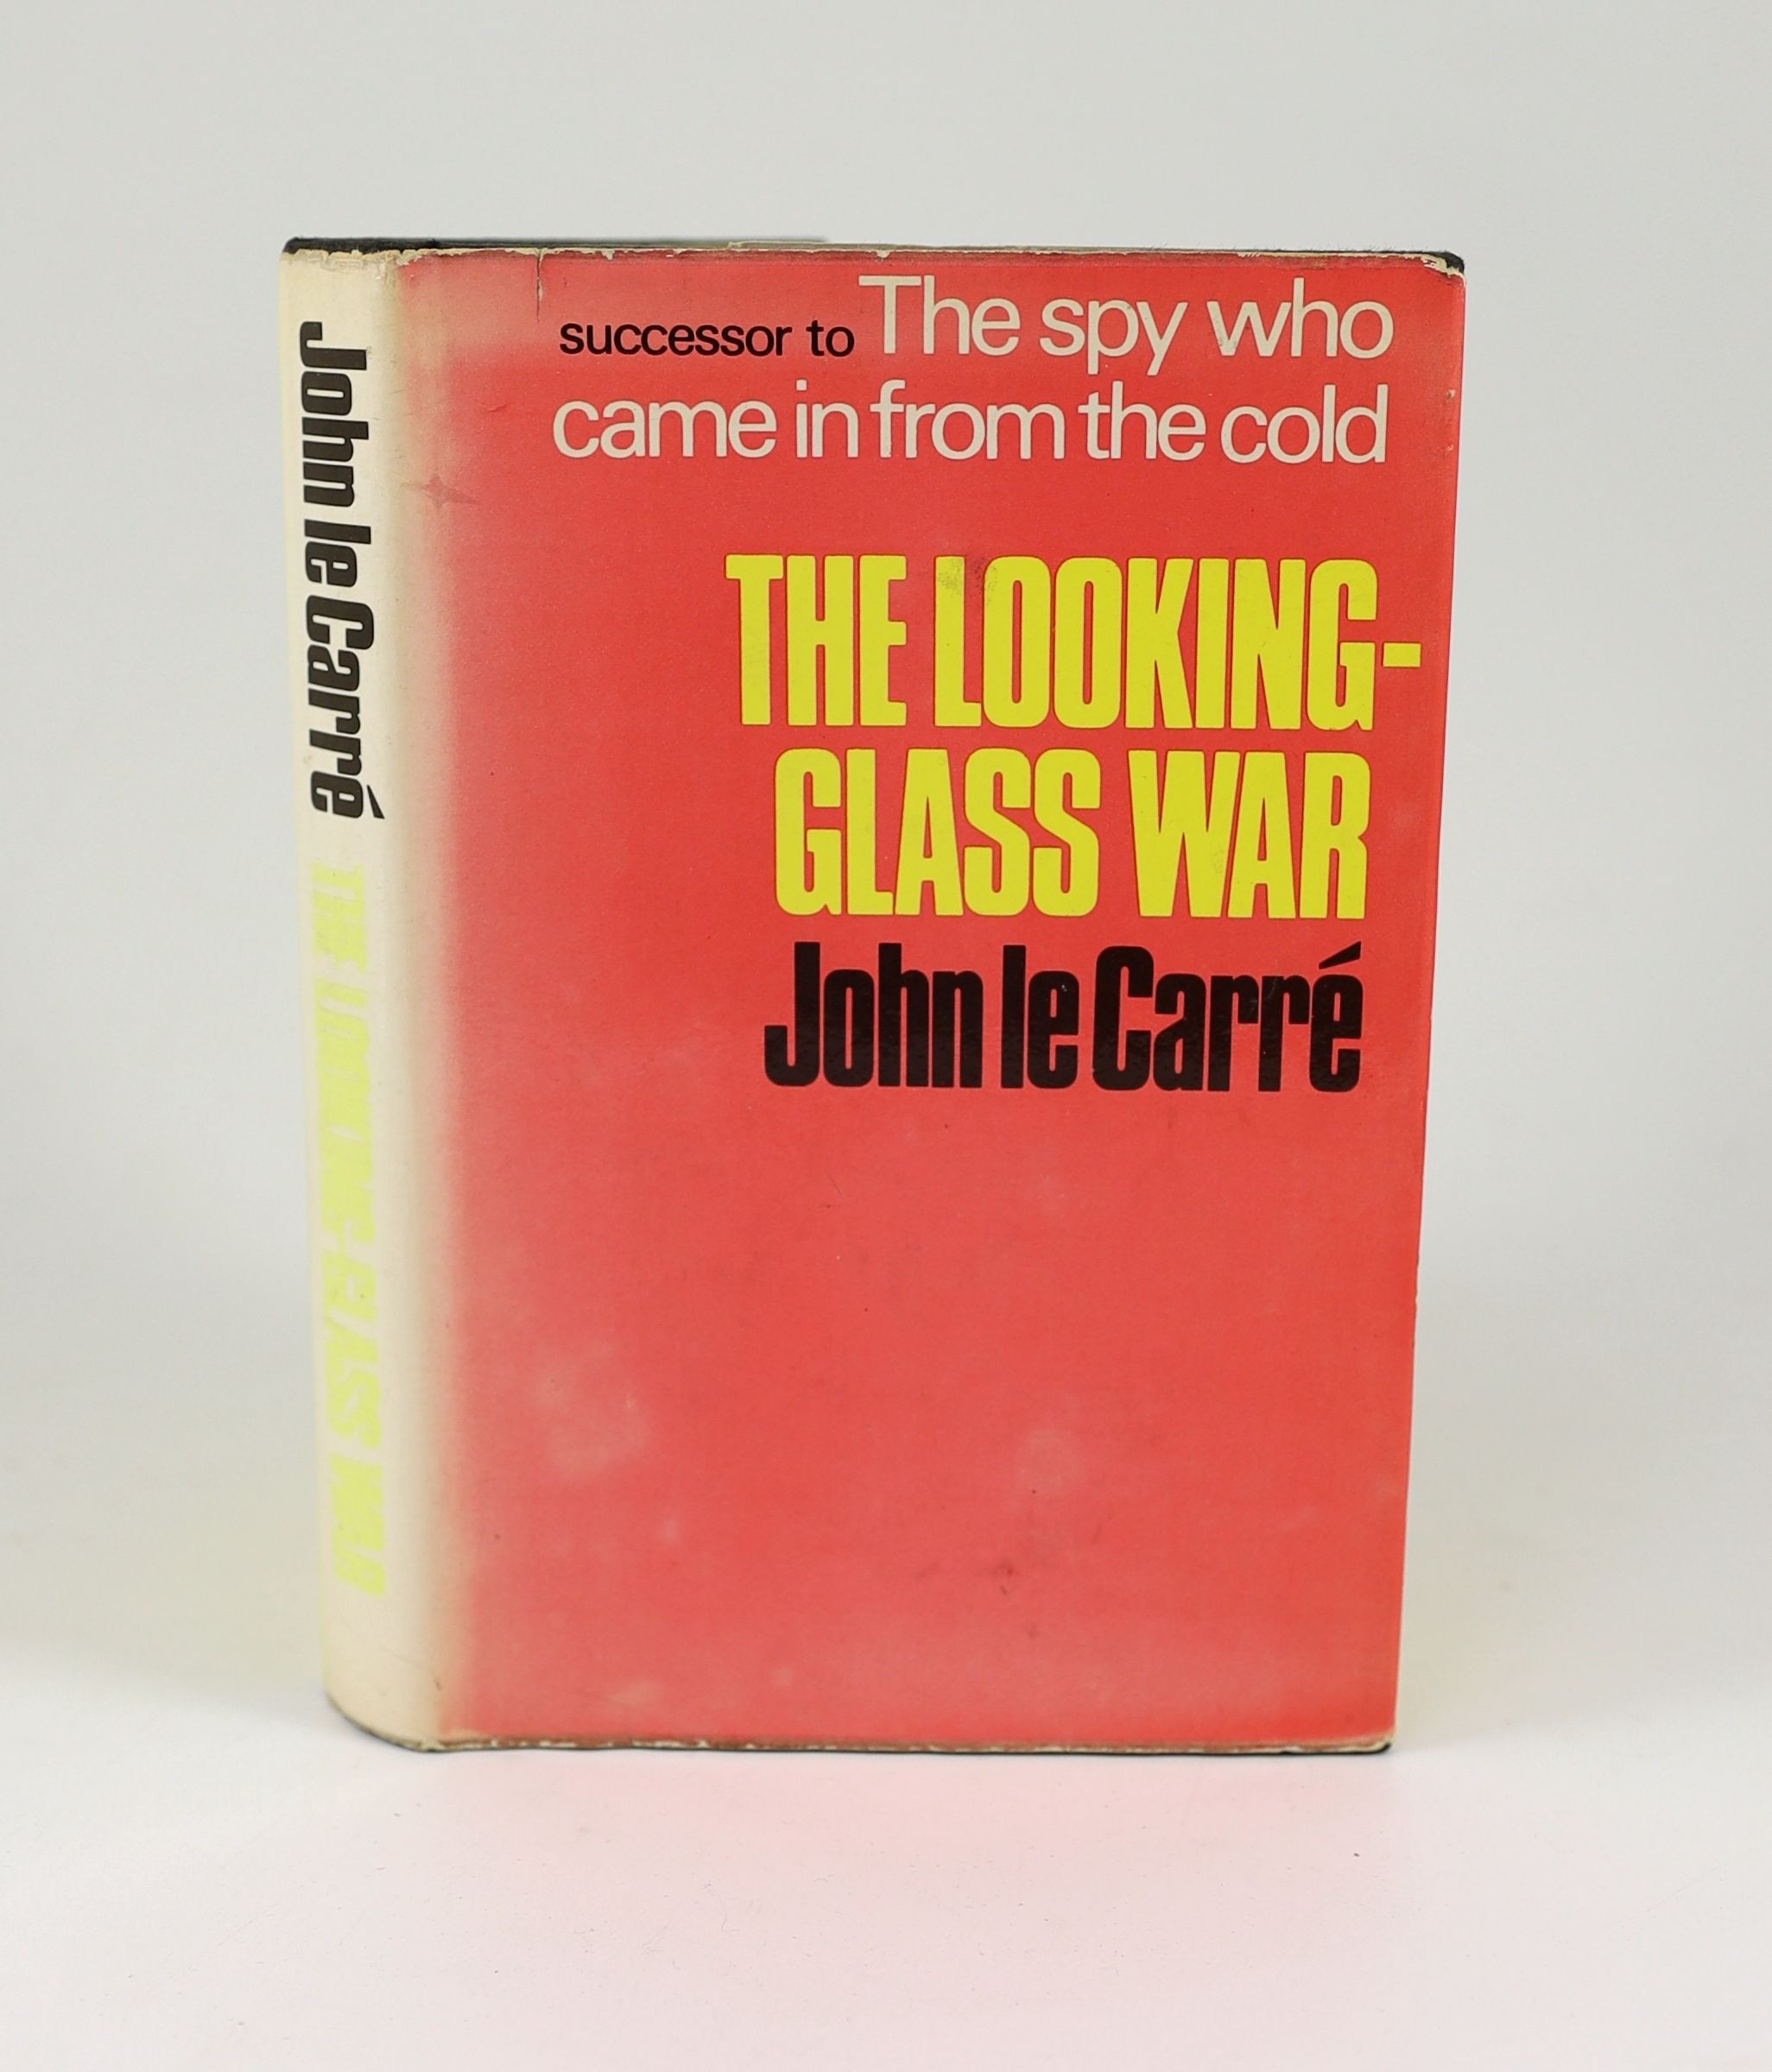 Le Carre, John - The Looking-Glass War, 1st edition, in unclipped d/j, spine sunned, Heinemann, London, 1965